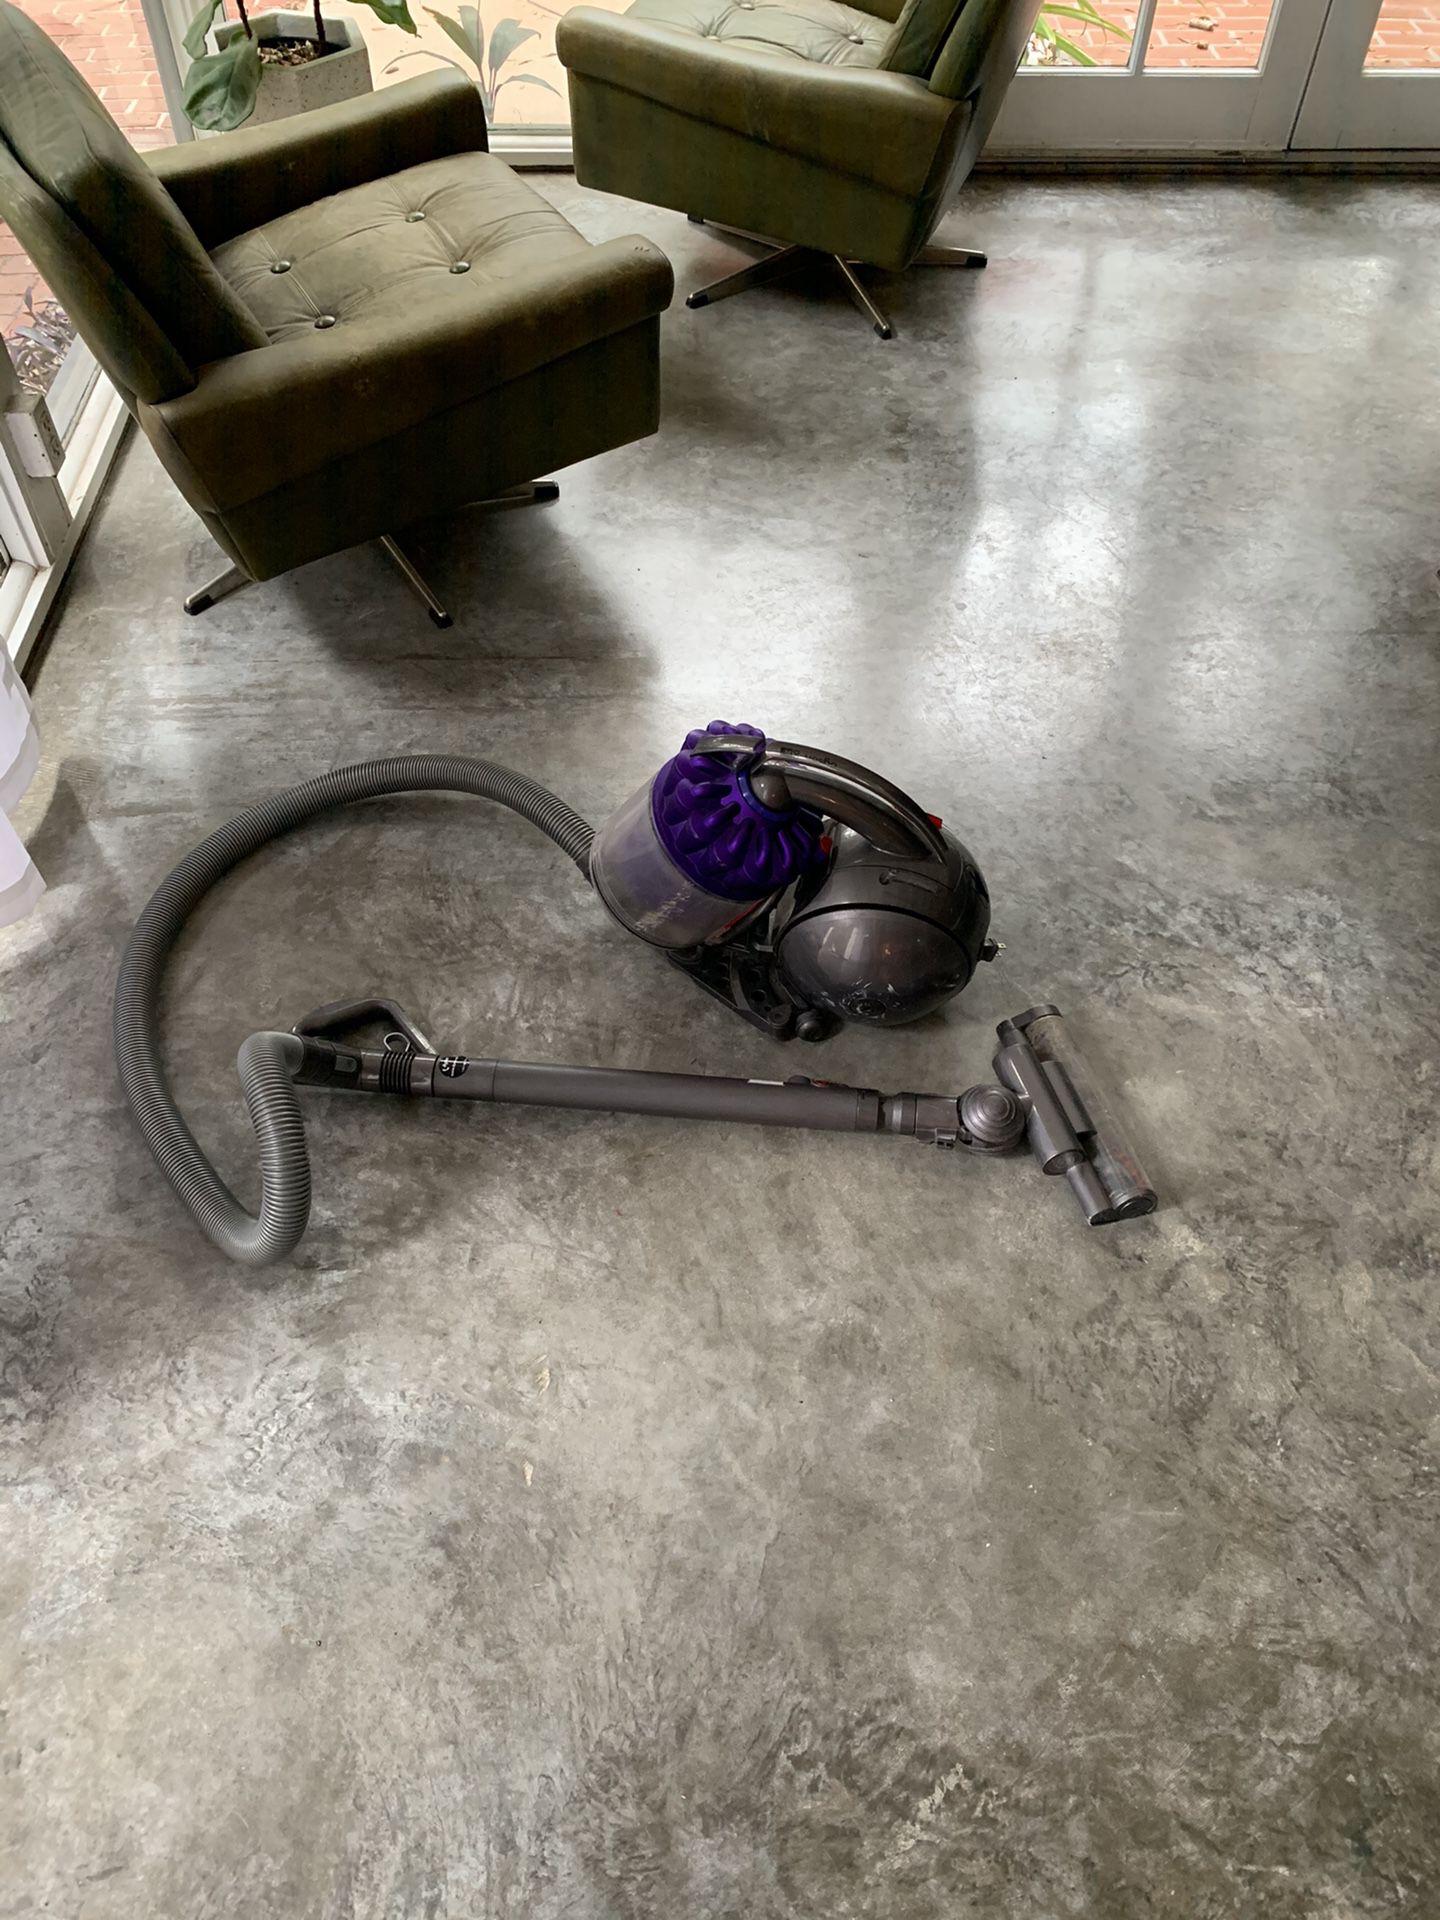 Dyson DC 39 canister vacuum